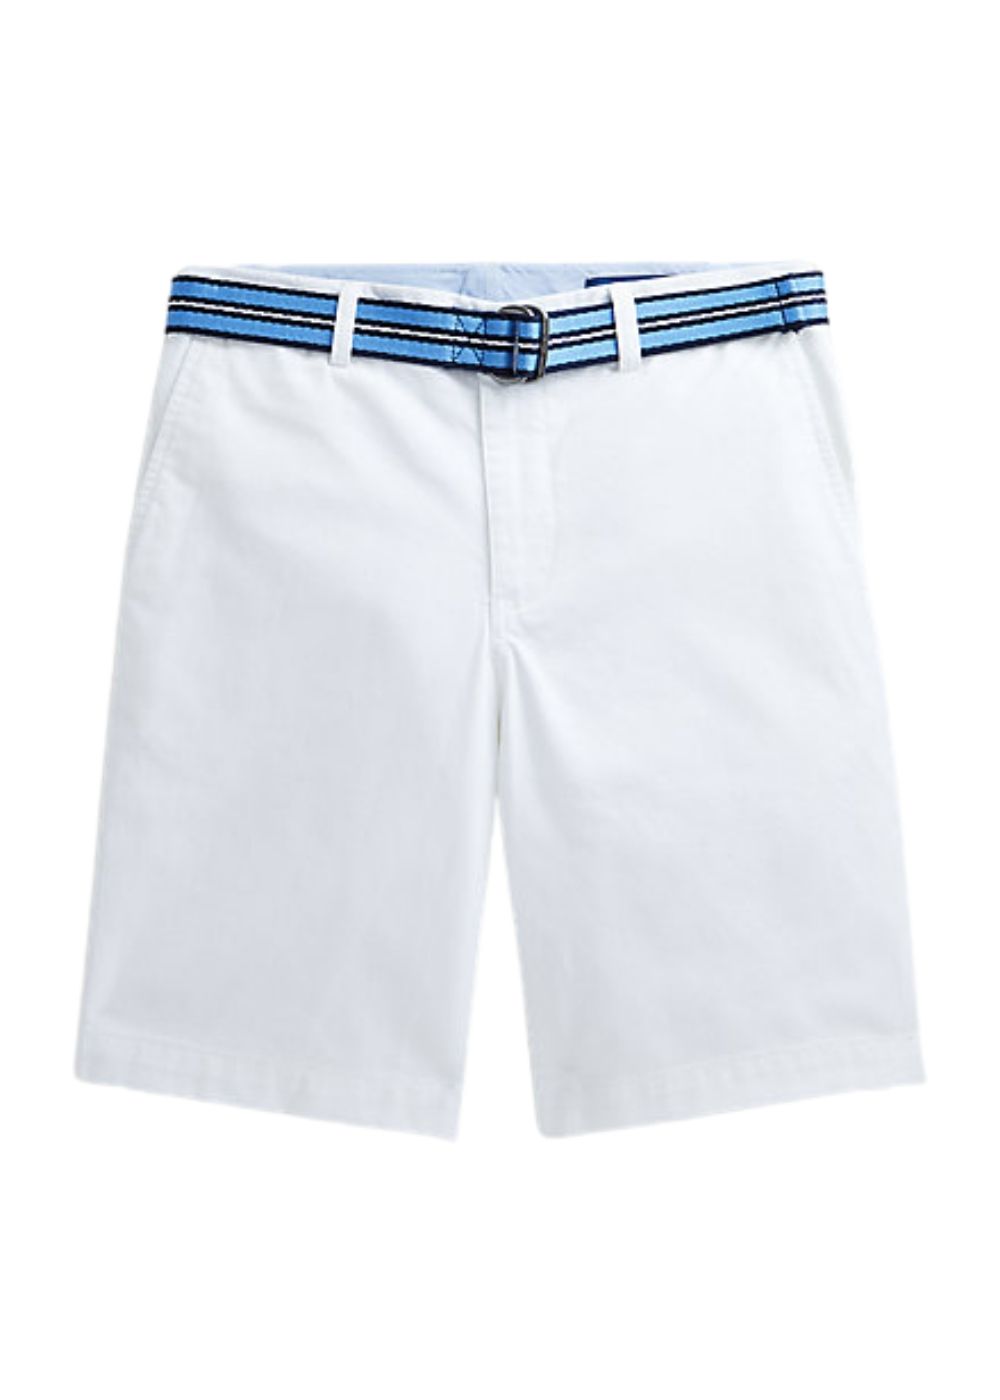 Featured image for “Polo Ralph Lauren Short Straight-fit”